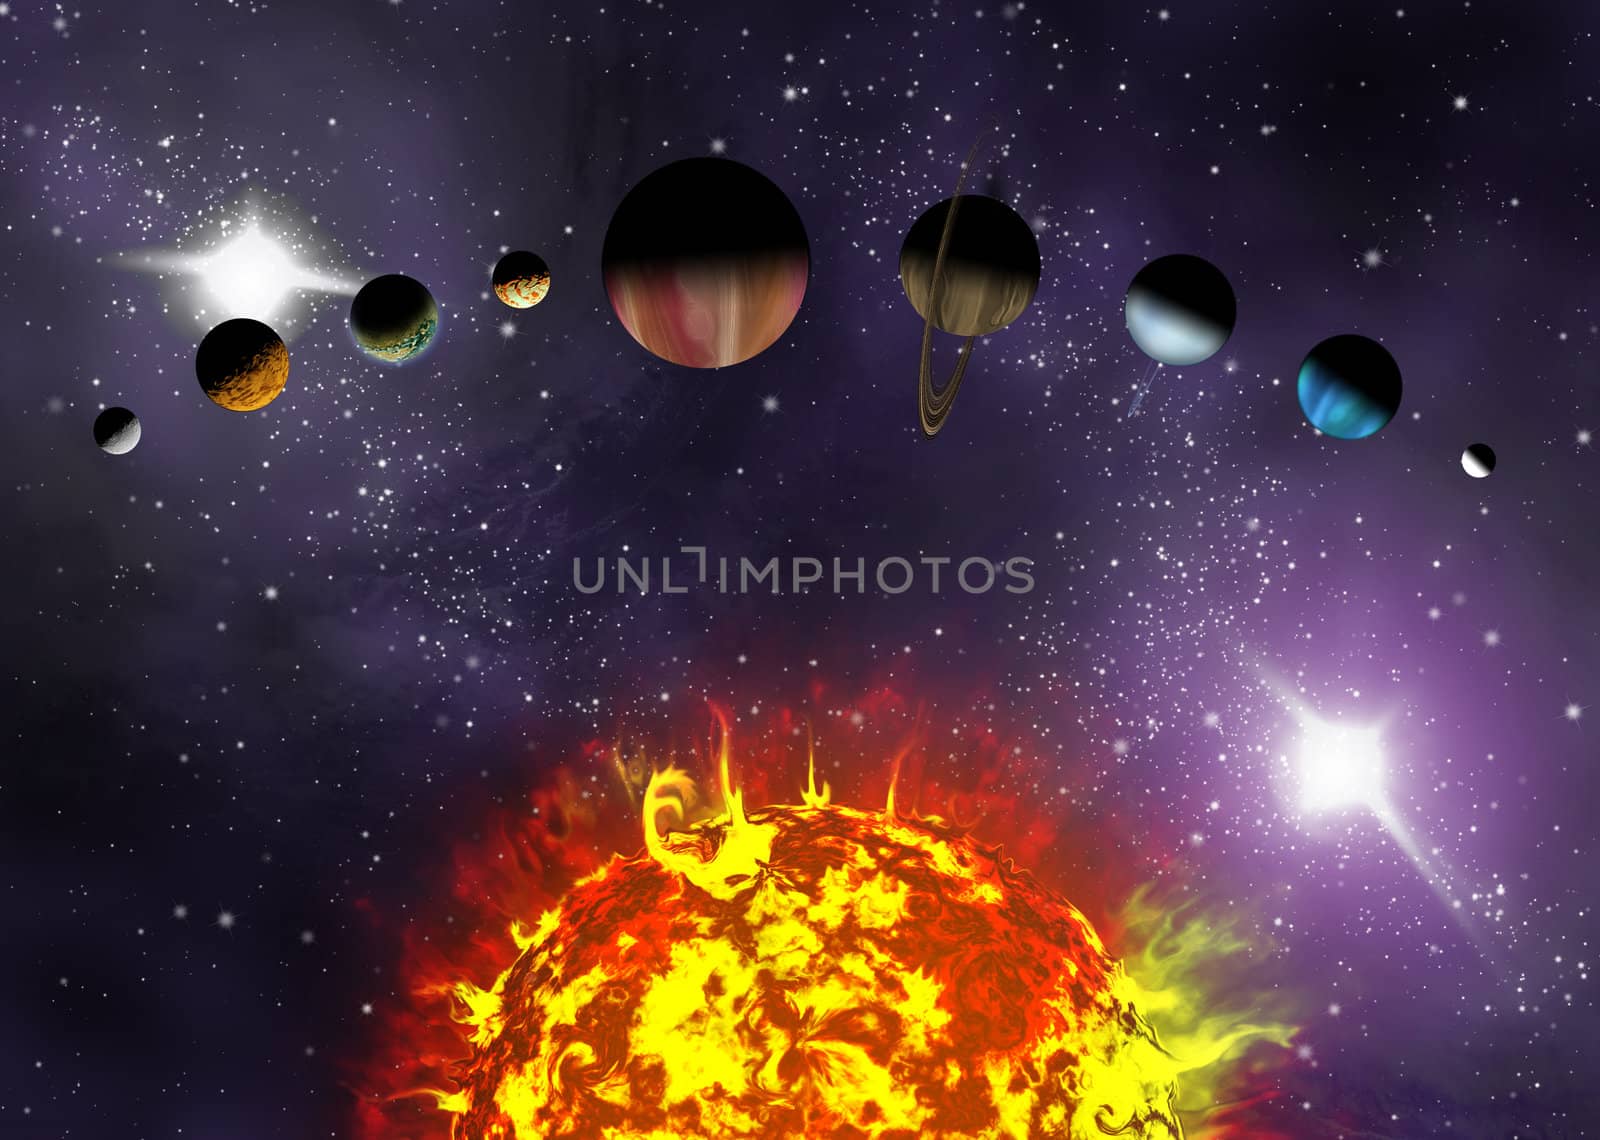 Illustrated diagram showing the order of planets in our solar system. Abstract illustration of planets in deep space.